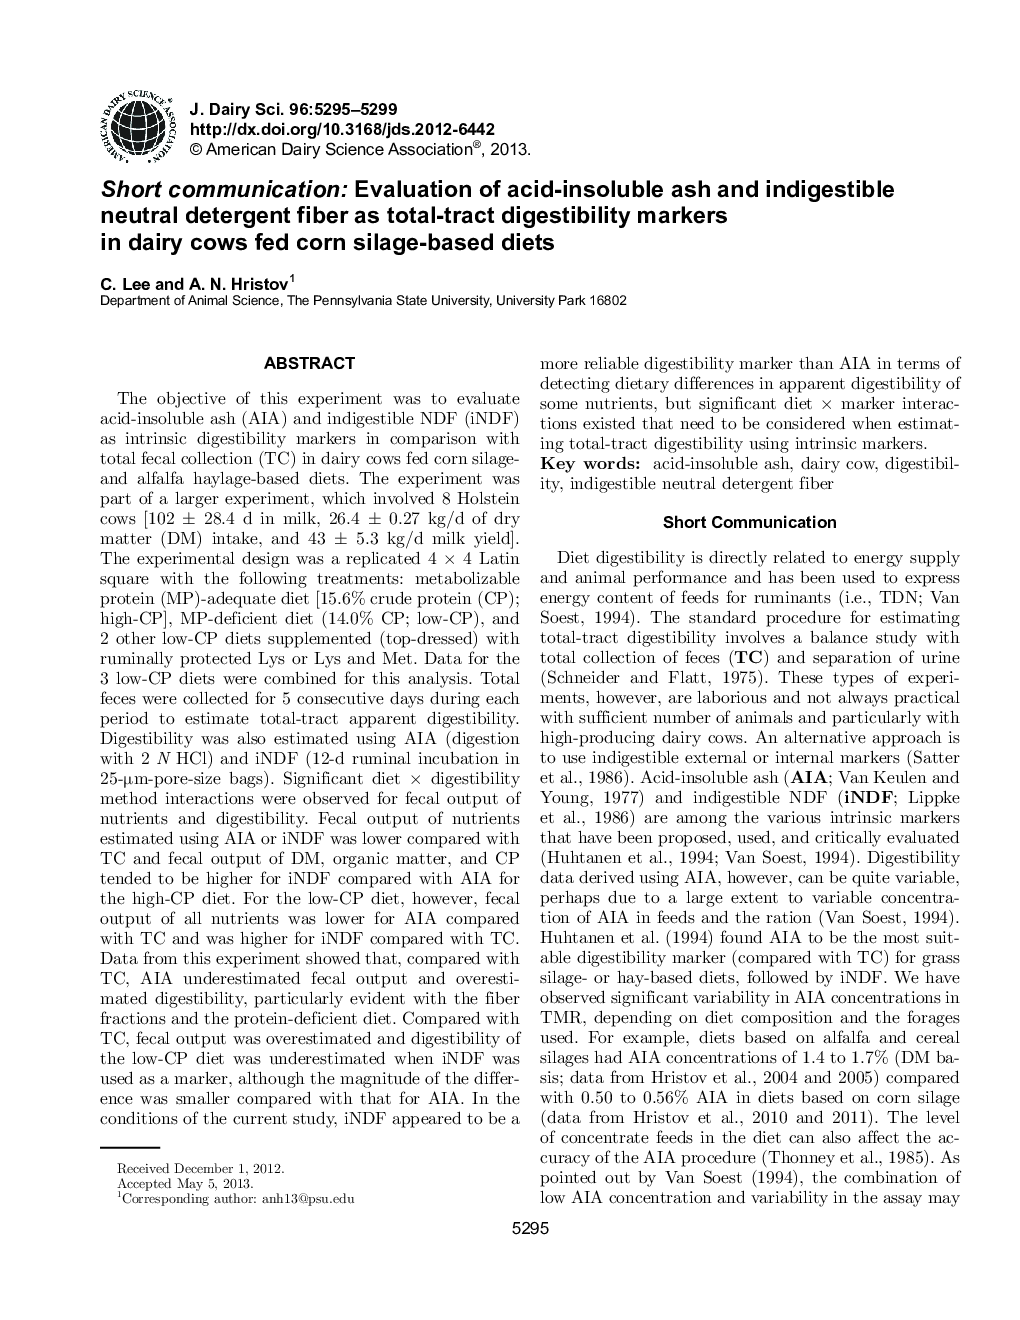 Short communication: Evaluation of acid-insoluble ash and indigestible neutral detergent fiber as total-tract digestibility markers in dairy cows fed corn silage-based diets